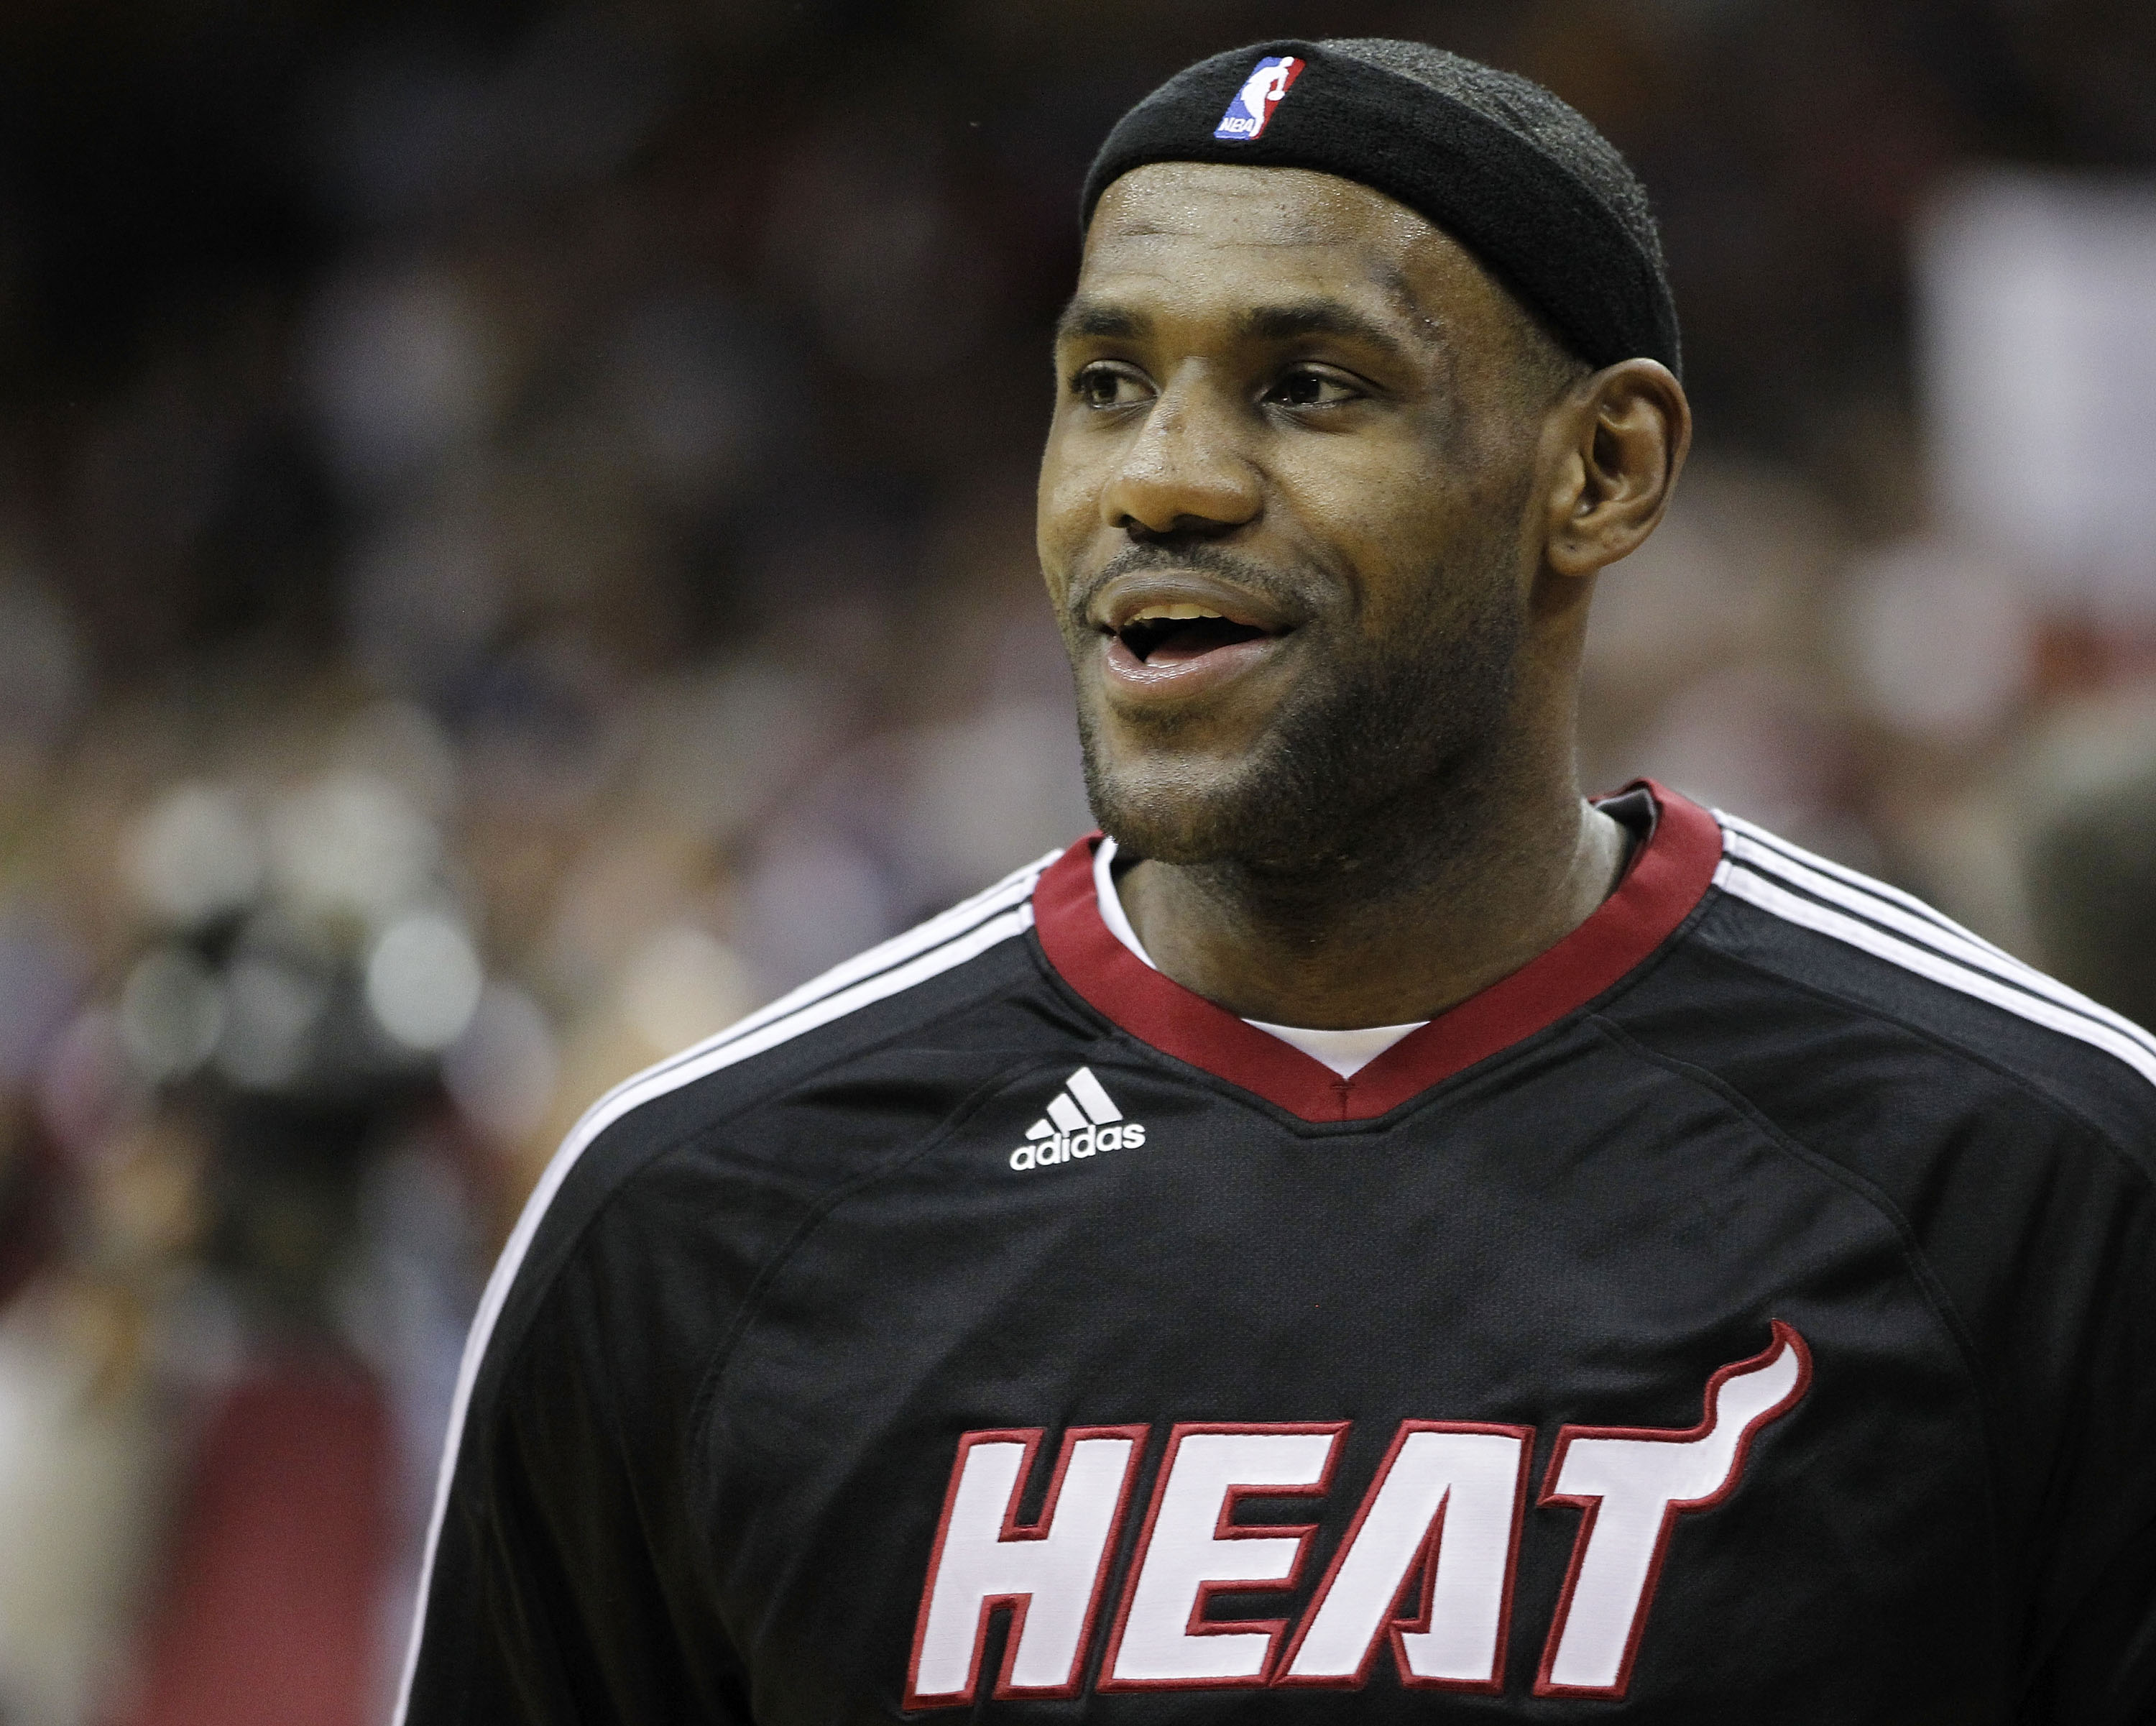 Sleeved jerseys not enough to stop LeBron, Heat in Christmas Day